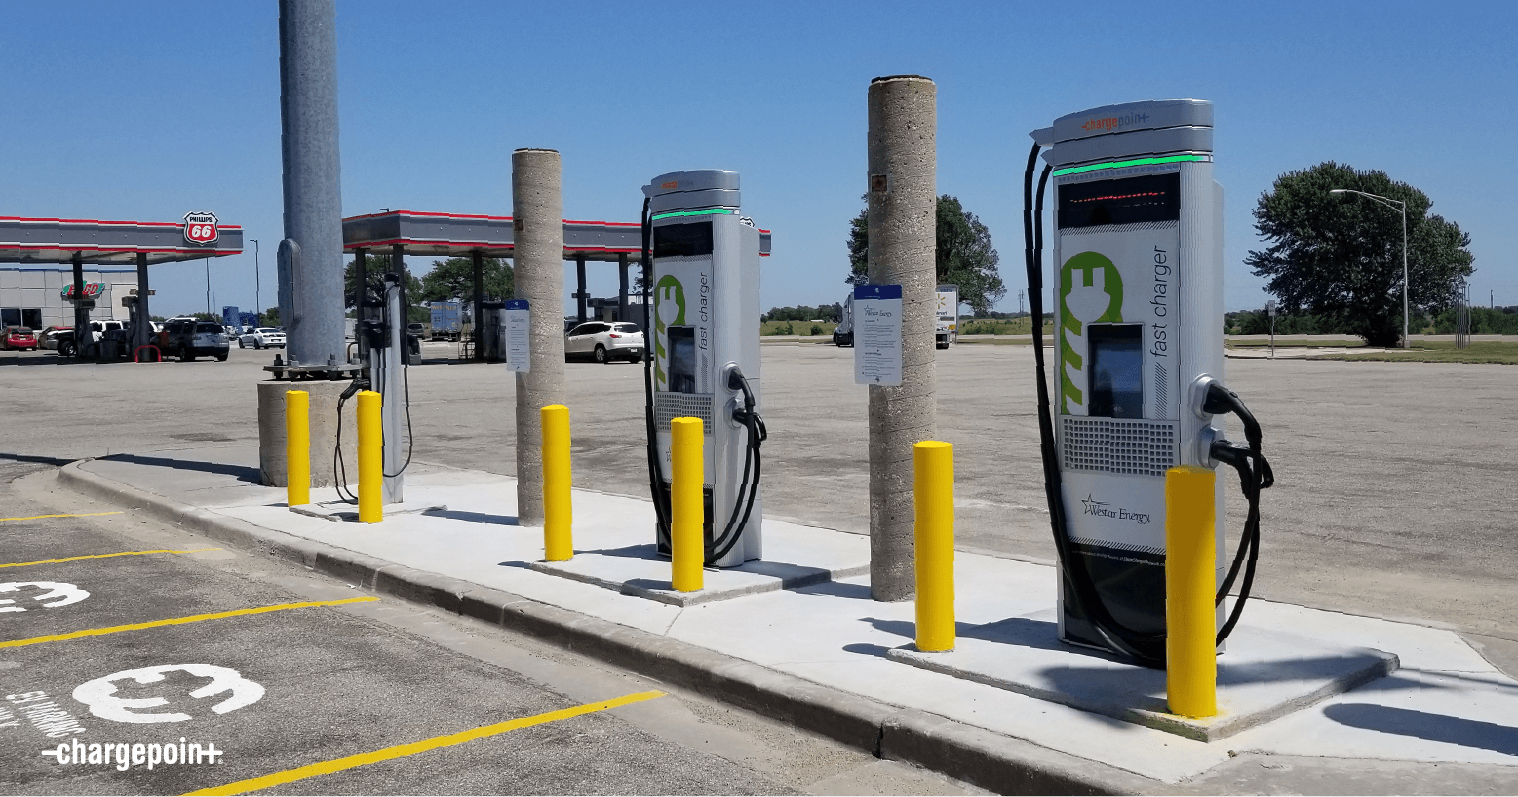 ChargePoint Express 250 stations in Towanda